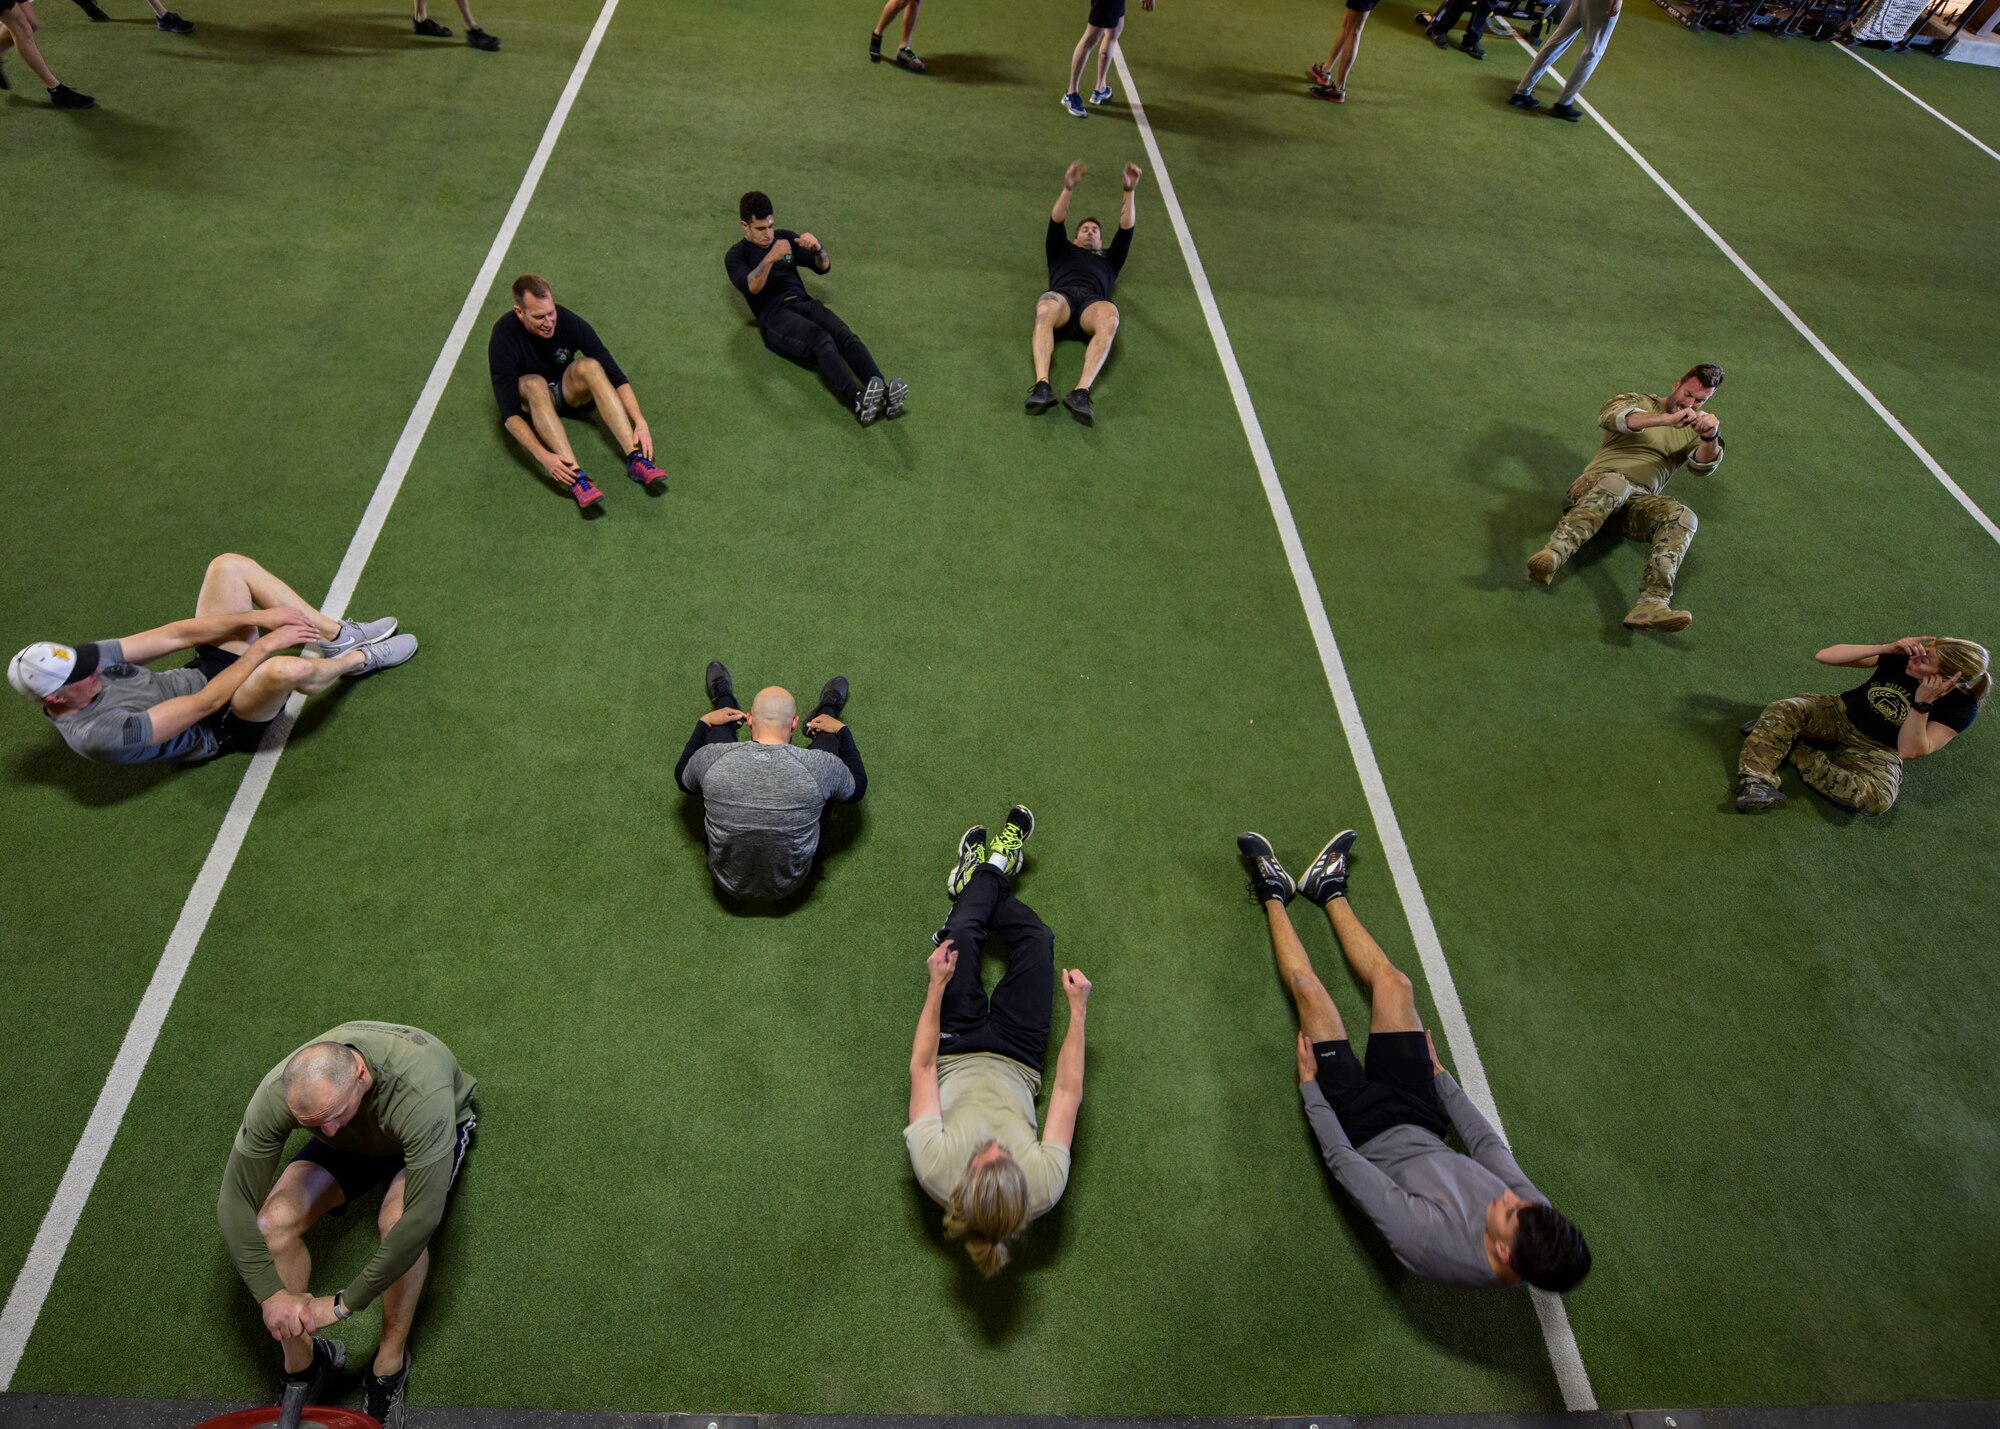 A team participating in the Maltz Challenge perform sit-ups at Kirtland Air Force Base, N.M., March 15, 2019. The Maltz Challenge is a timed, team competition that consists of a 400-meter run, 50 pull-ups, 100 yard fireman’s carry, 50 dips, 100 push-ups, 50 knees-to-elbows, 100 sit-ups and another 400-meter run. (U.S. Air Force photo by Airman 1st Class Austin J. Prisbrey)